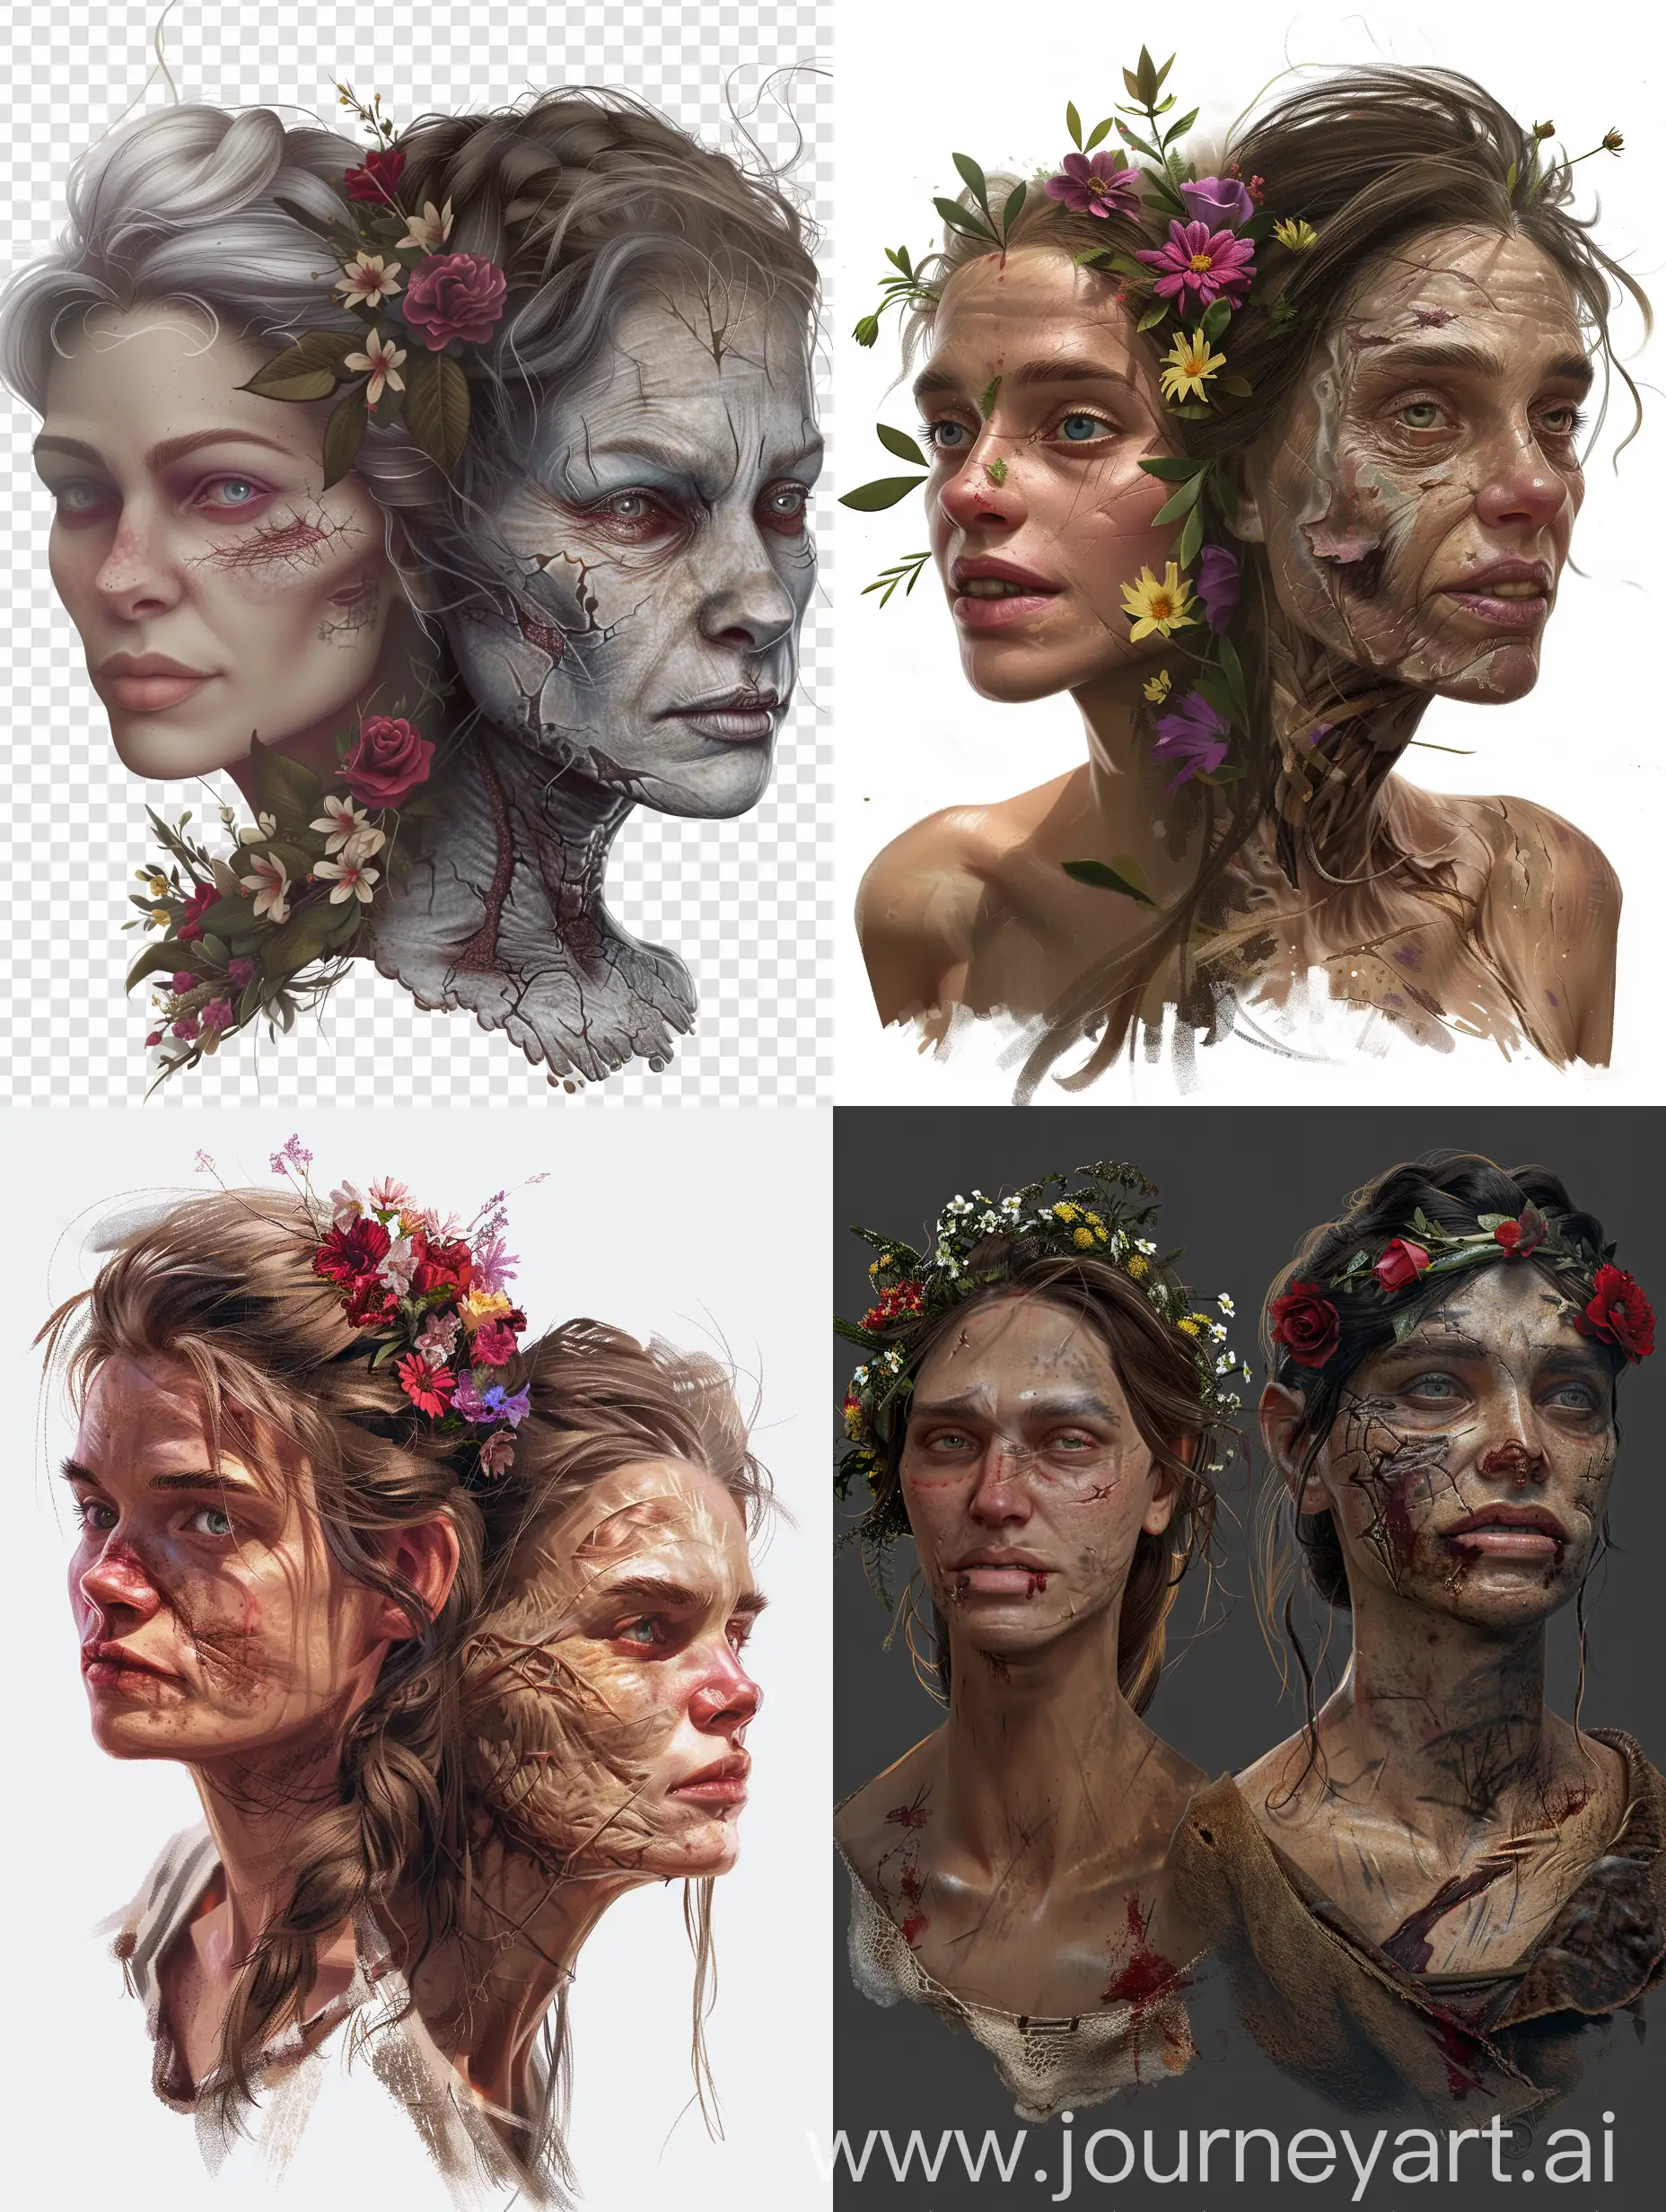 Realistic style. Transparent Background. Faces of two women. One woman is joyful, happy, beautiful, with flowers in her hair. The second woman is tired, sad, has some wrinkles, scars on her face and damaged hair.